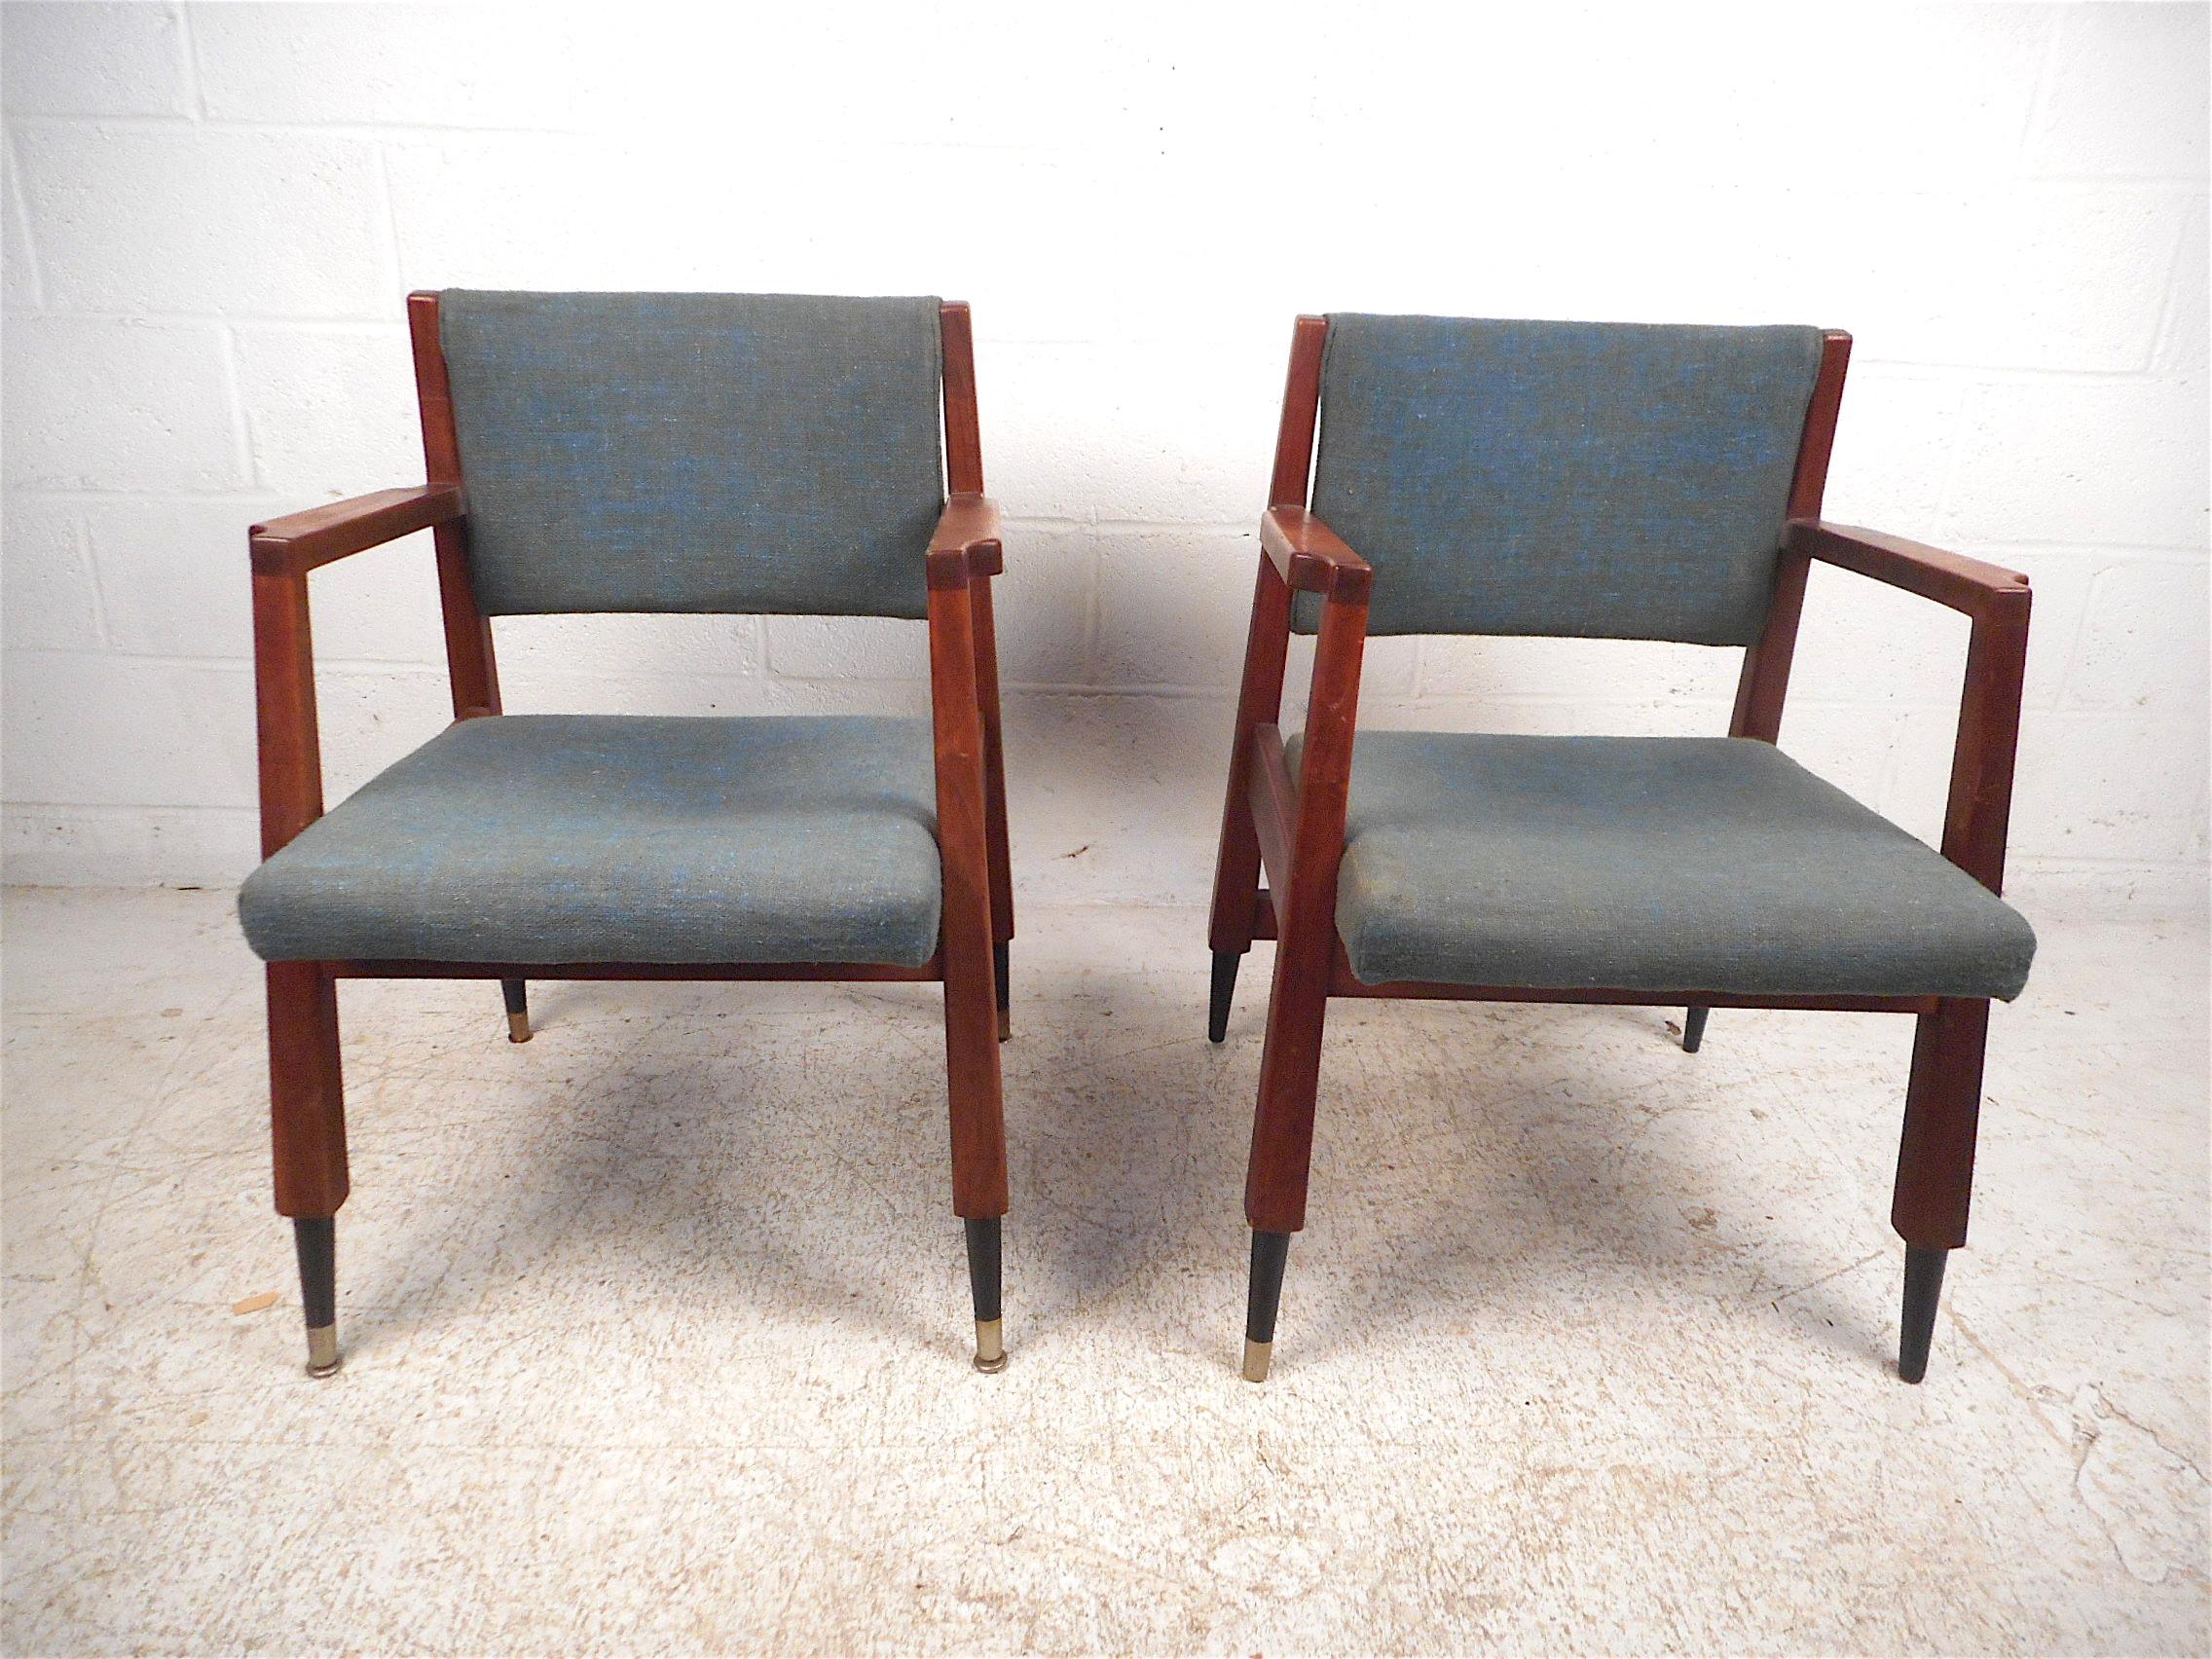 Stylish pair of midcentury armchairs. Sturdy walnut construction with a sleek angular frame, sculpted armrests, and covered in a vintage blue upholstery. This pair is sure to make an impressive addition to any modern interior's seating arrangement.